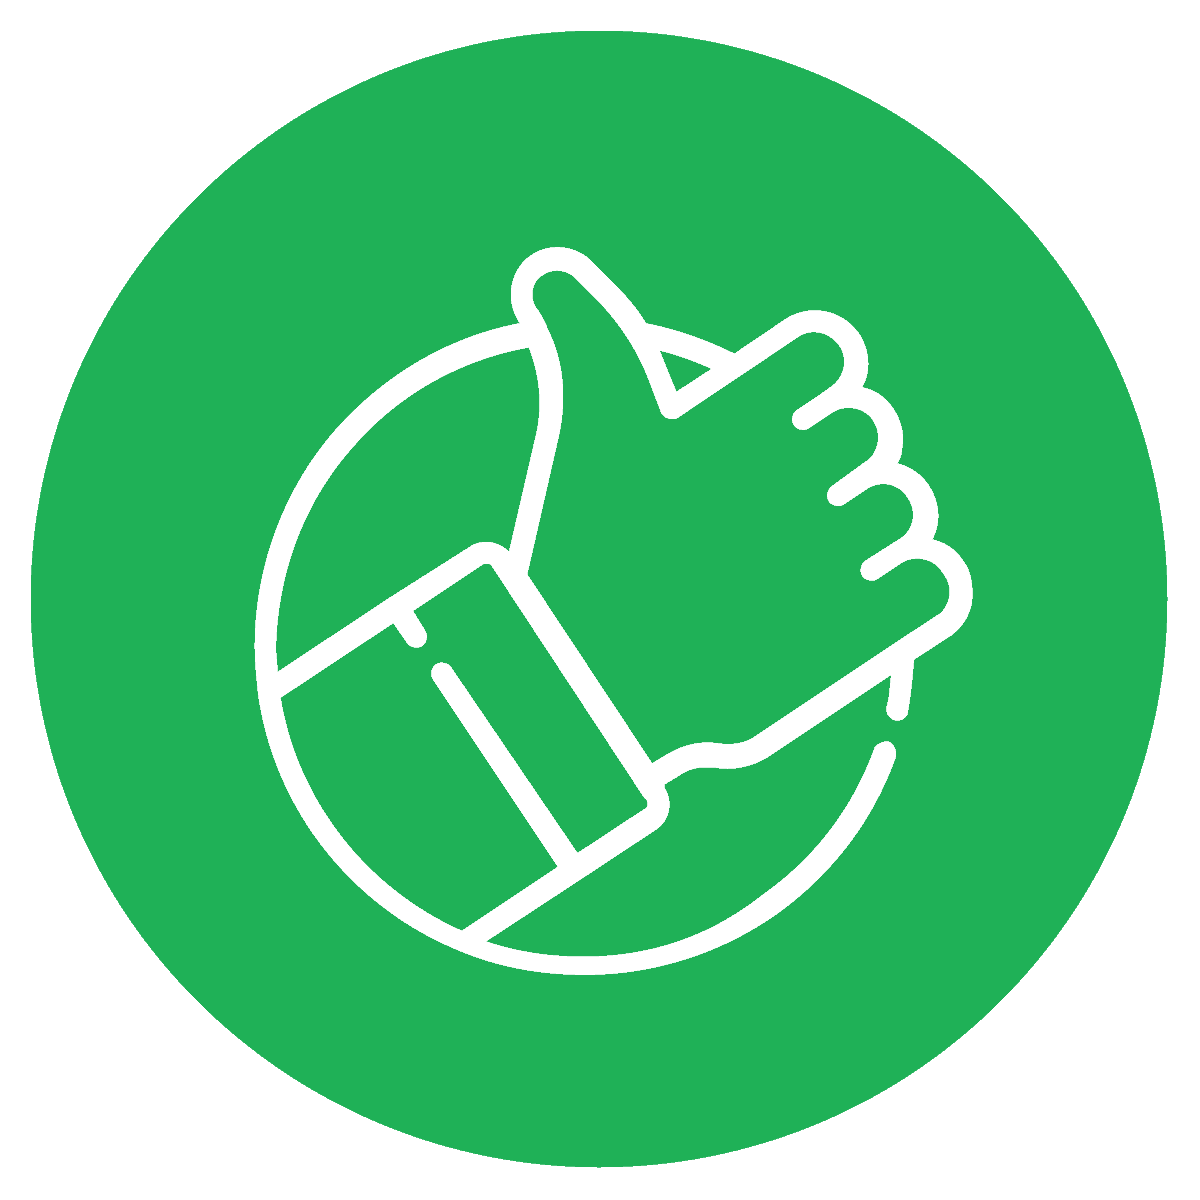 Graphic of a thumbs up